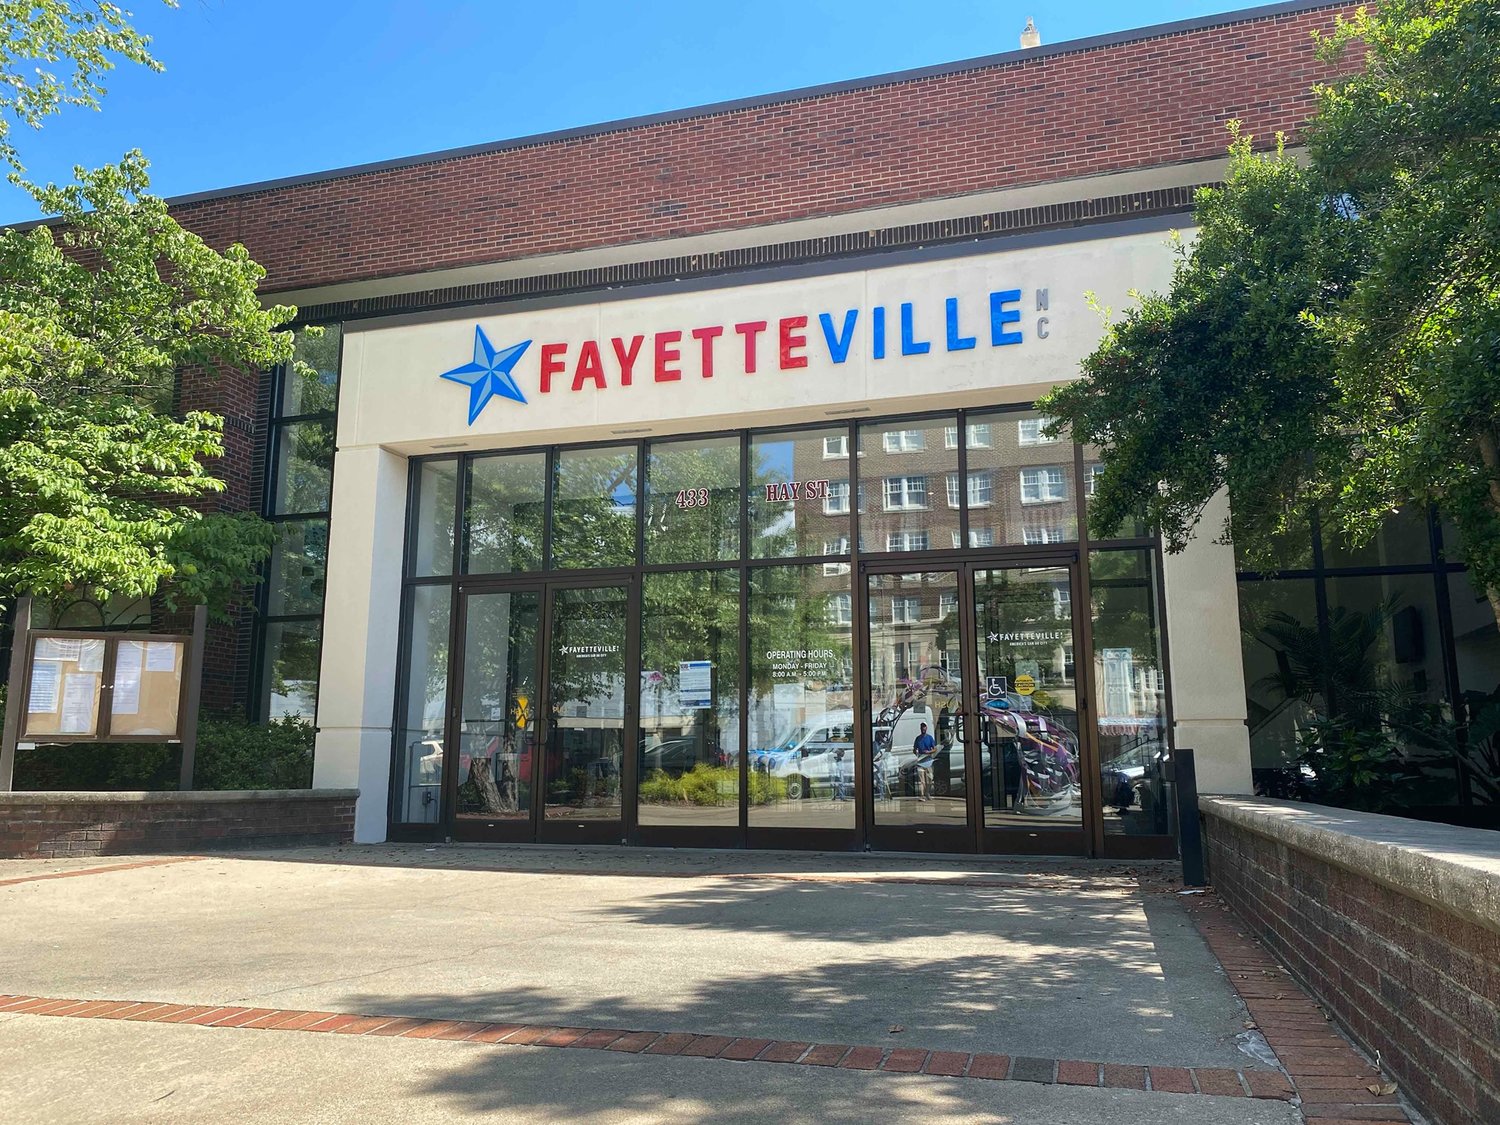 Whether a Fayetteville advocacy group’s petition to change the way City Council members are elected is valid is still up in the air after the Cumberland County Board of Elections on Tuesday took no action on the matter.